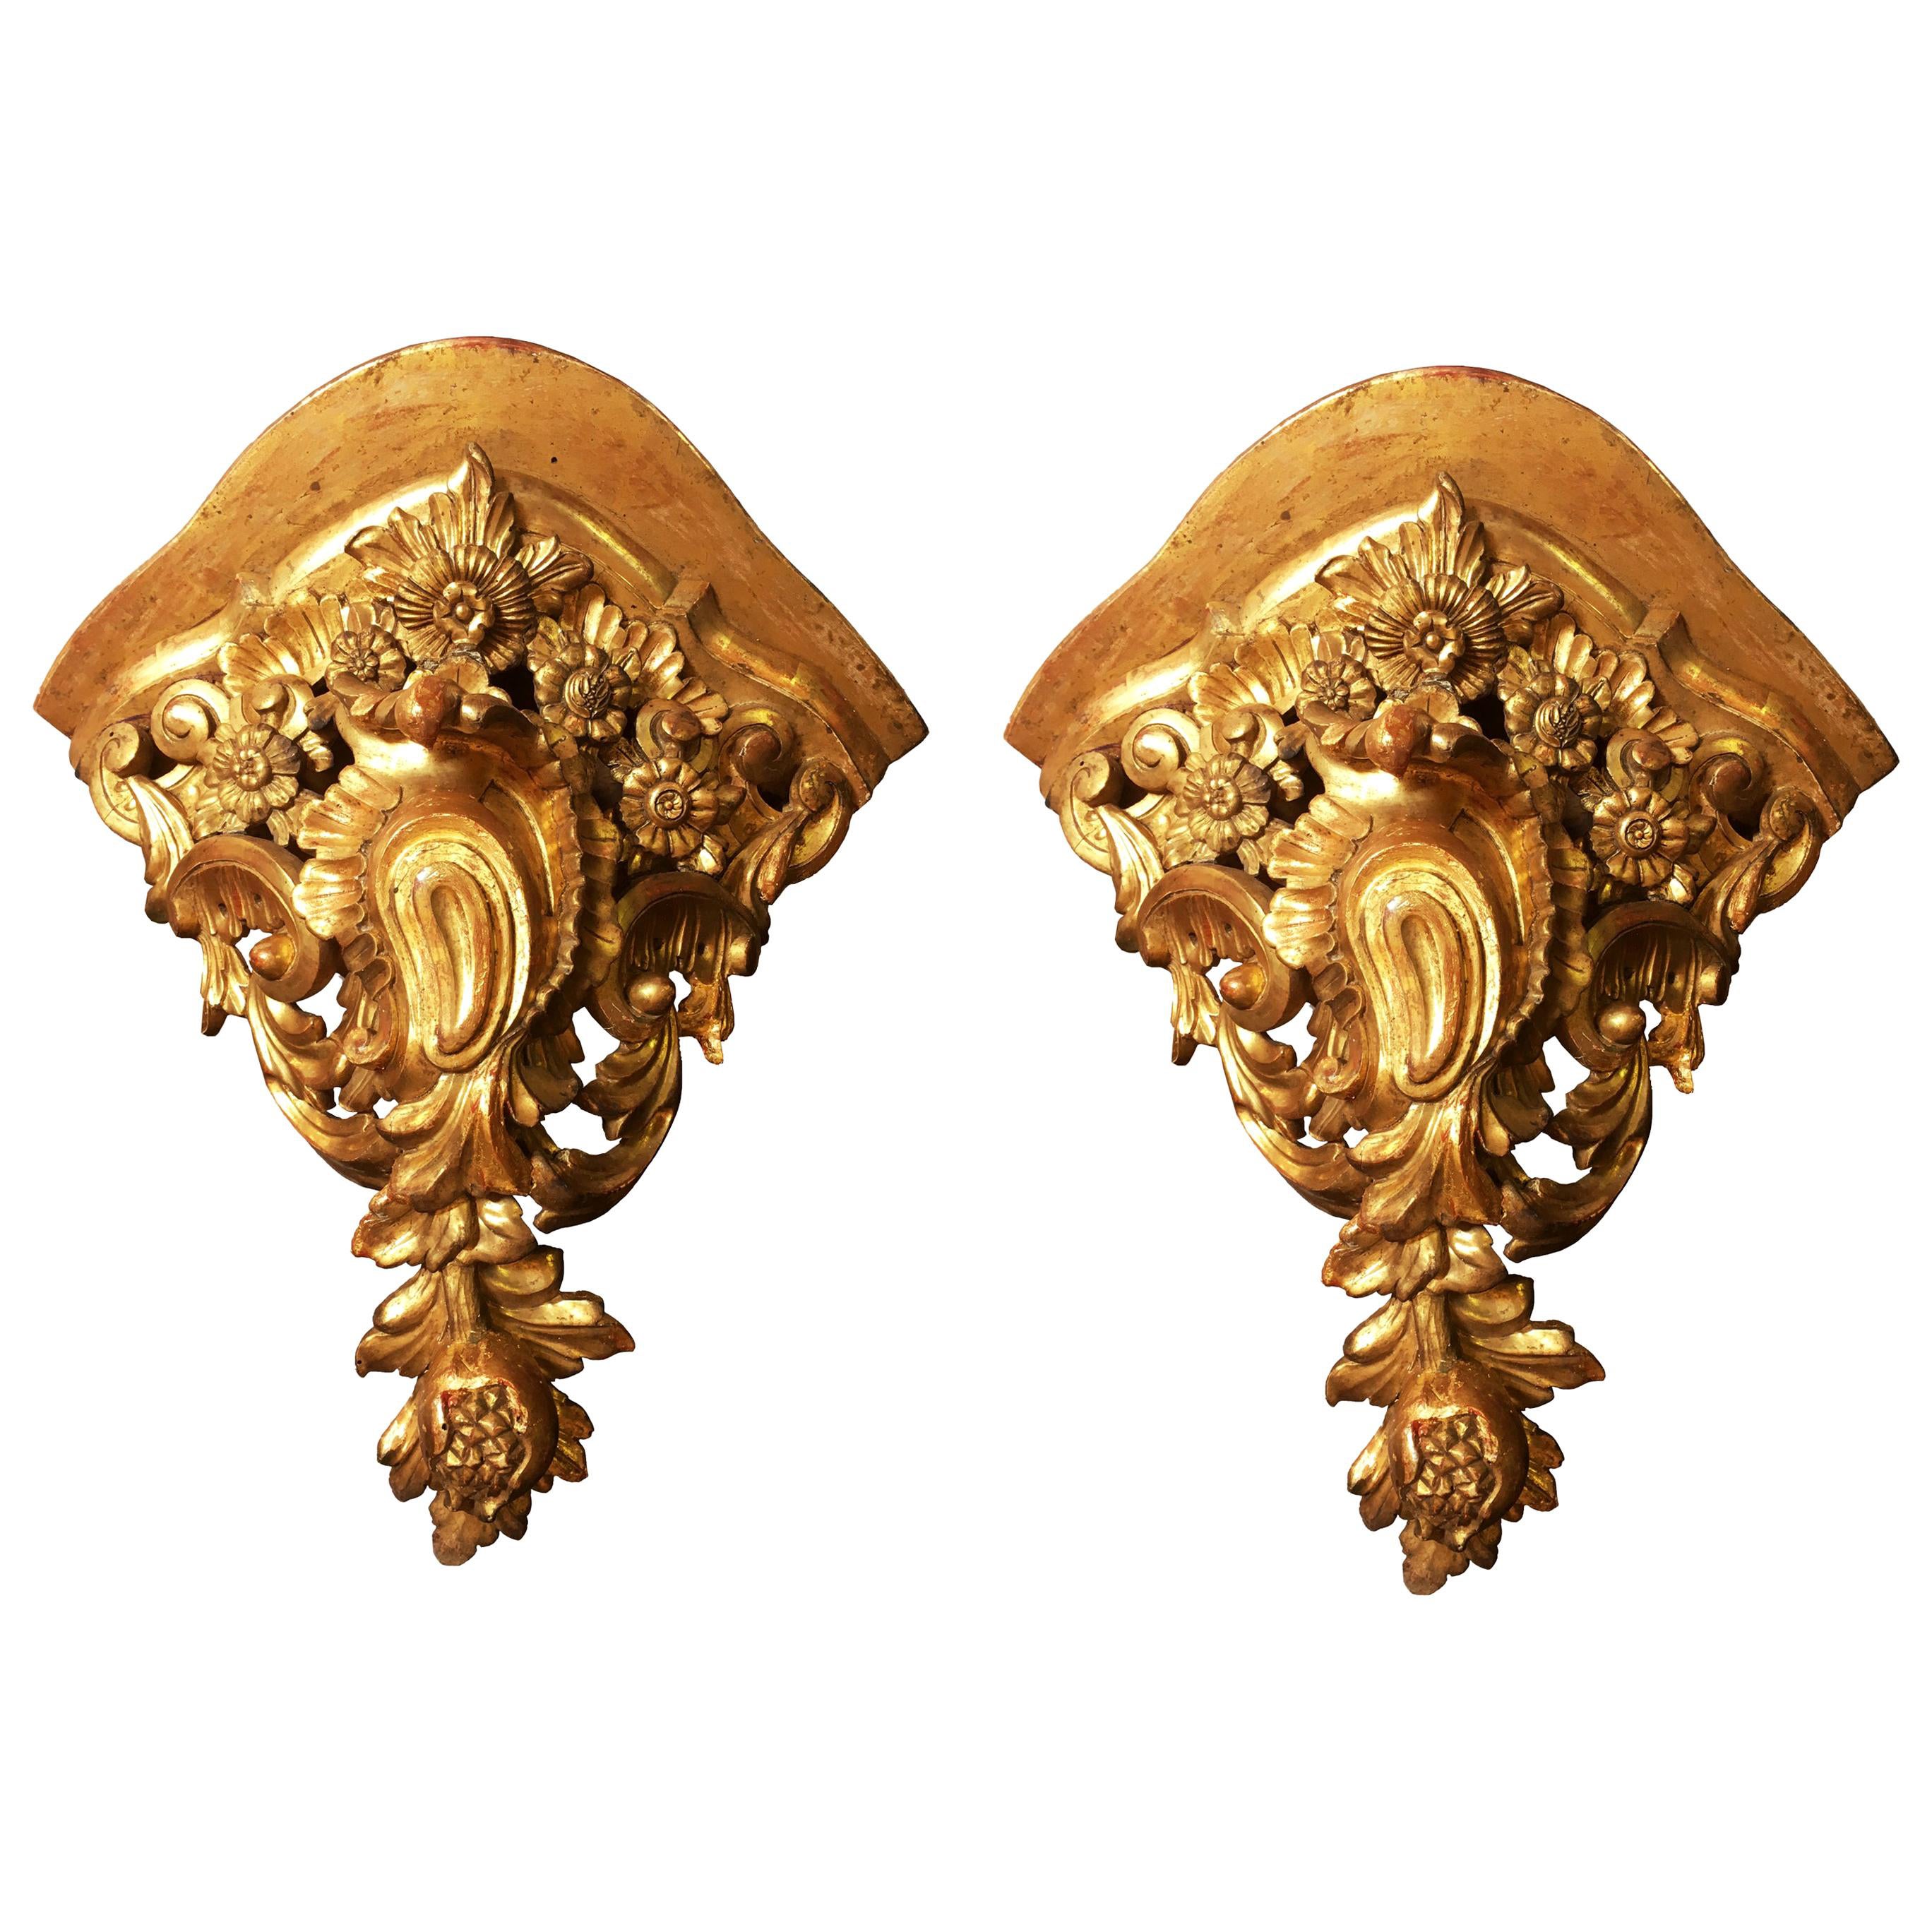 Pair of Large Mid-18th Century George II Rococo Gilt Corner Brackets For Sale